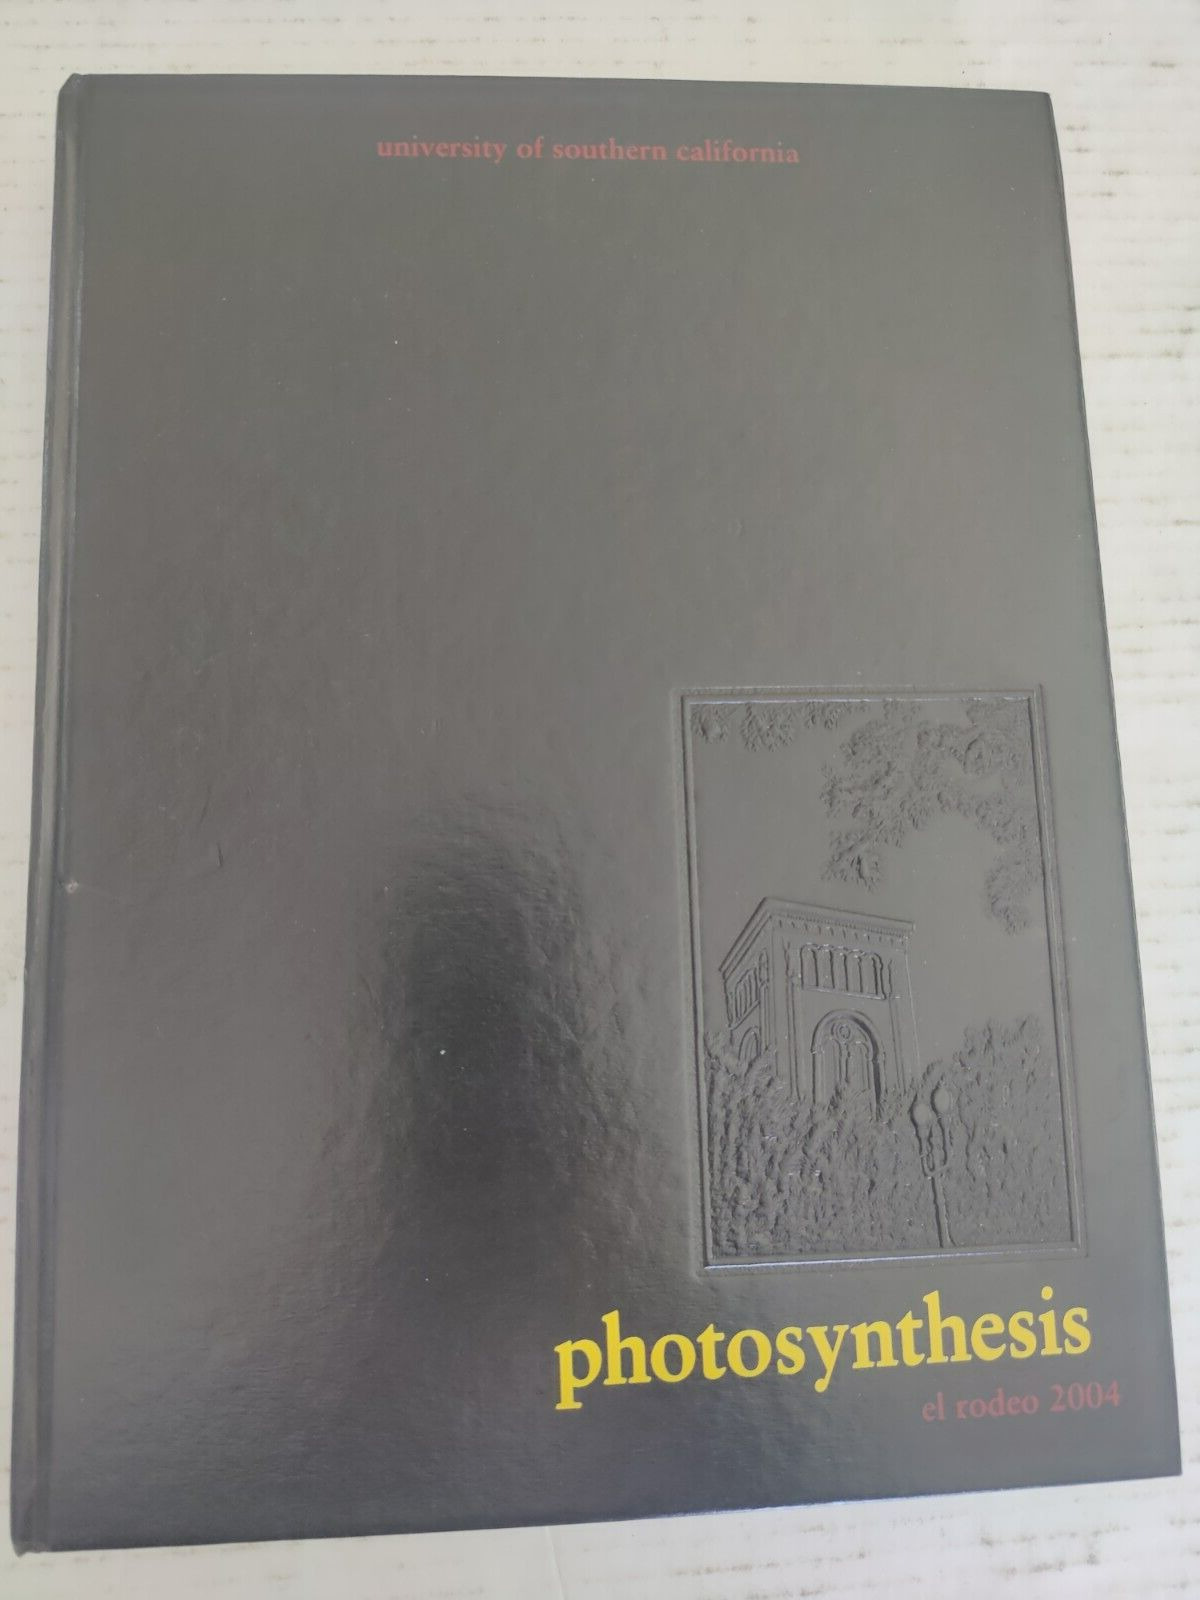 2004 Photosynthesis El Rodeo USC Hard Cover Yearbook Vintage